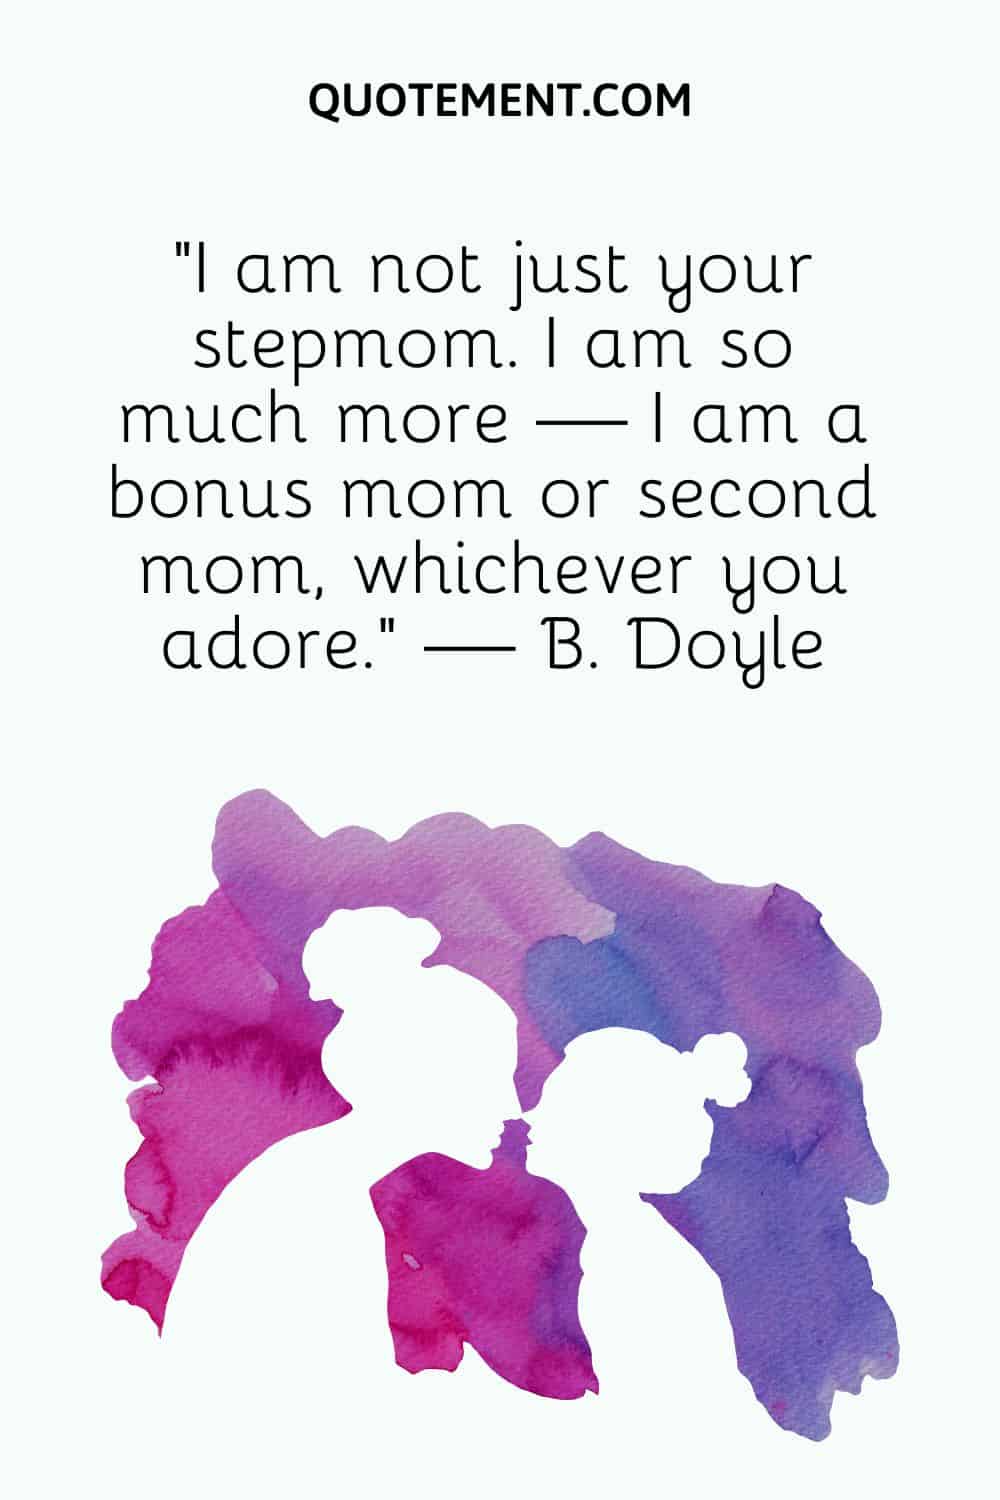 I am not just your stepmom. I am so much more